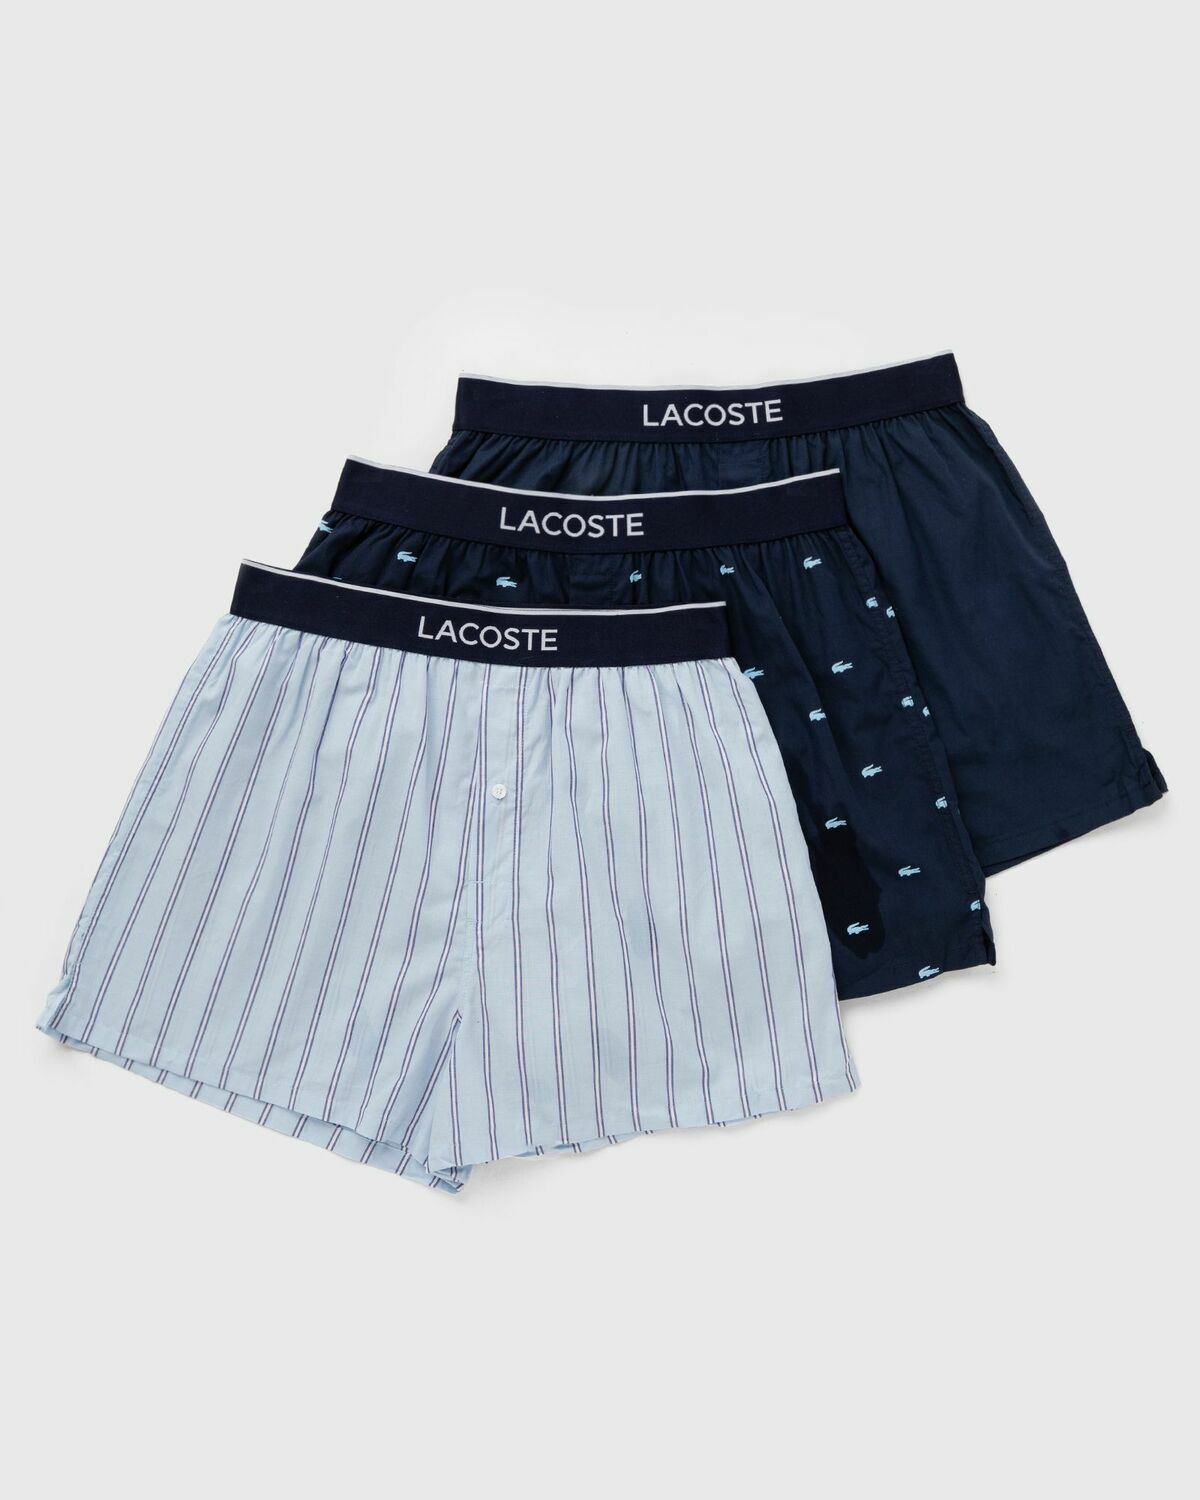 Lacoste Stretch Cotton Boxer (3 Pack)